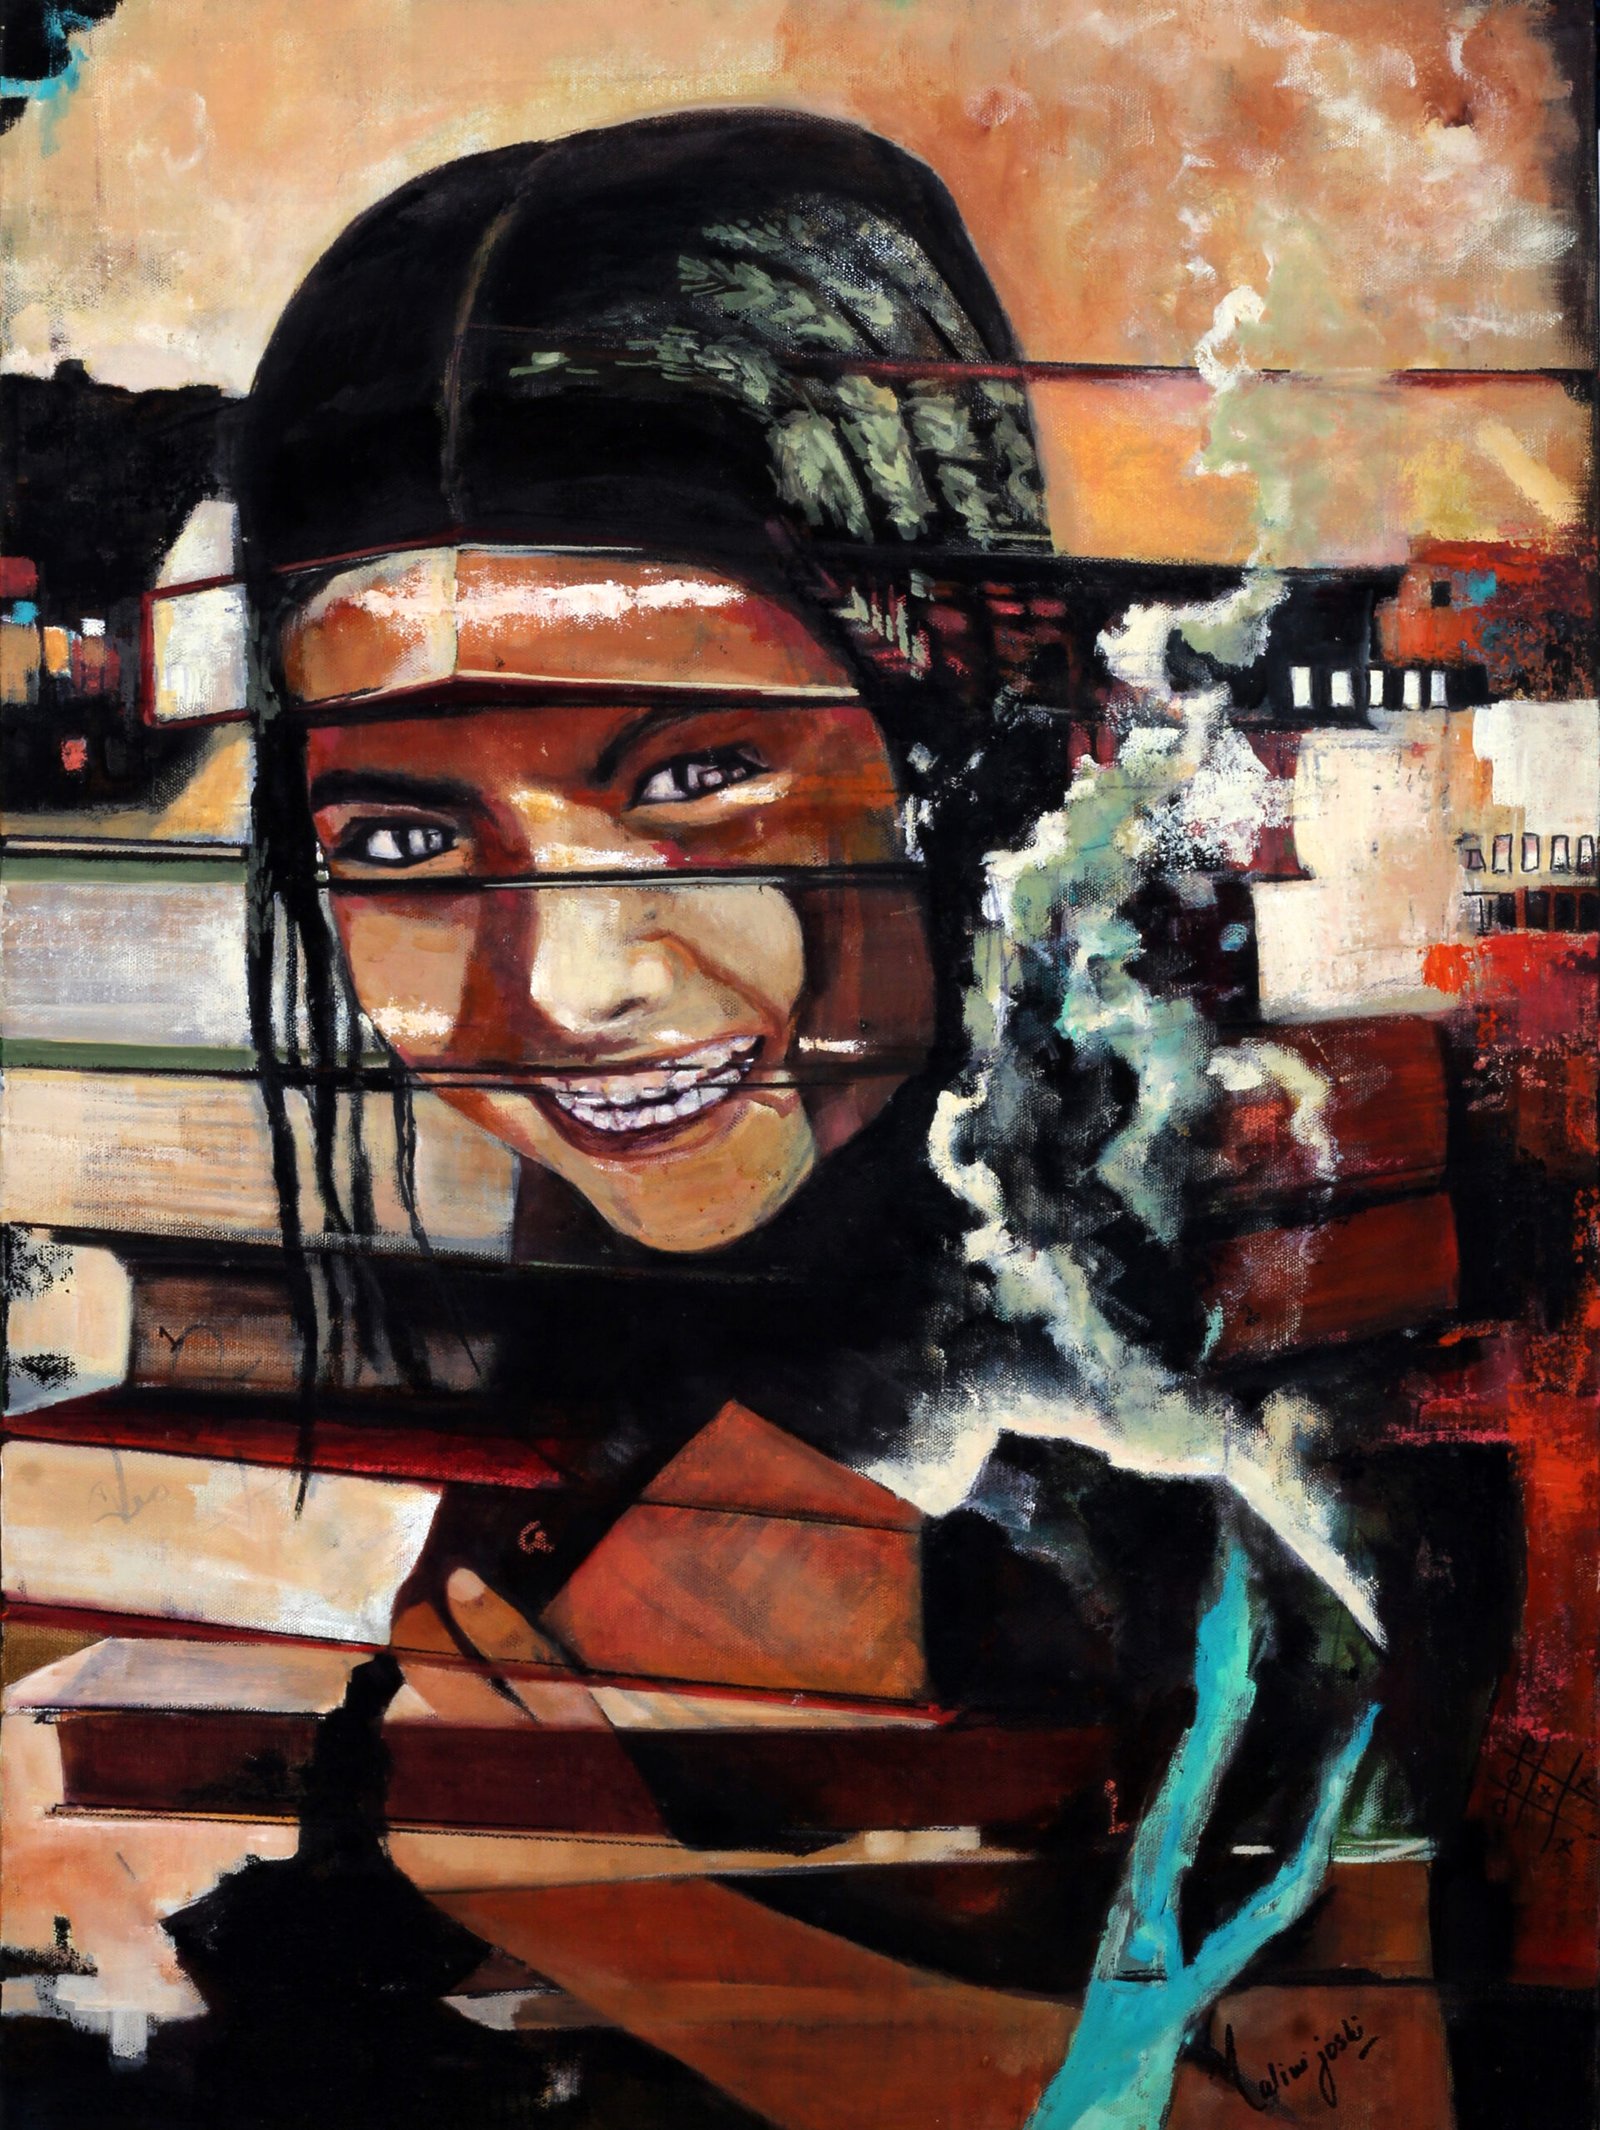 <em><strong>'Iqra'</strong></em> <br/><br/>22X30 inches<br/> Mixed Media and Oil on Canvas<br/>